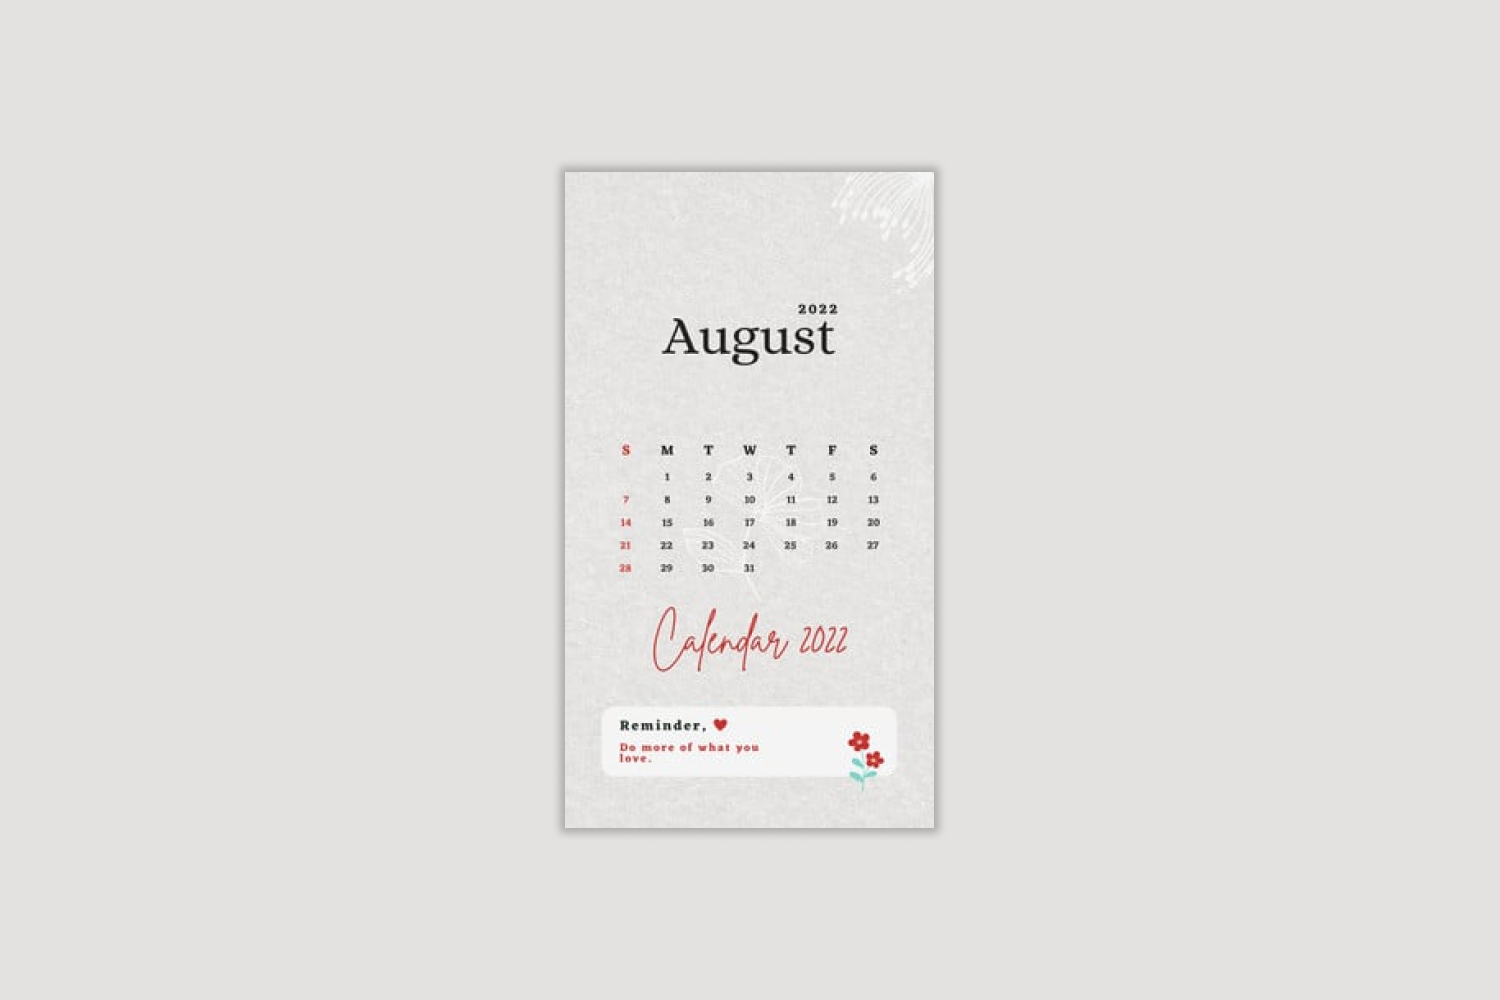 Reminder calendar on a gray background with red accents.